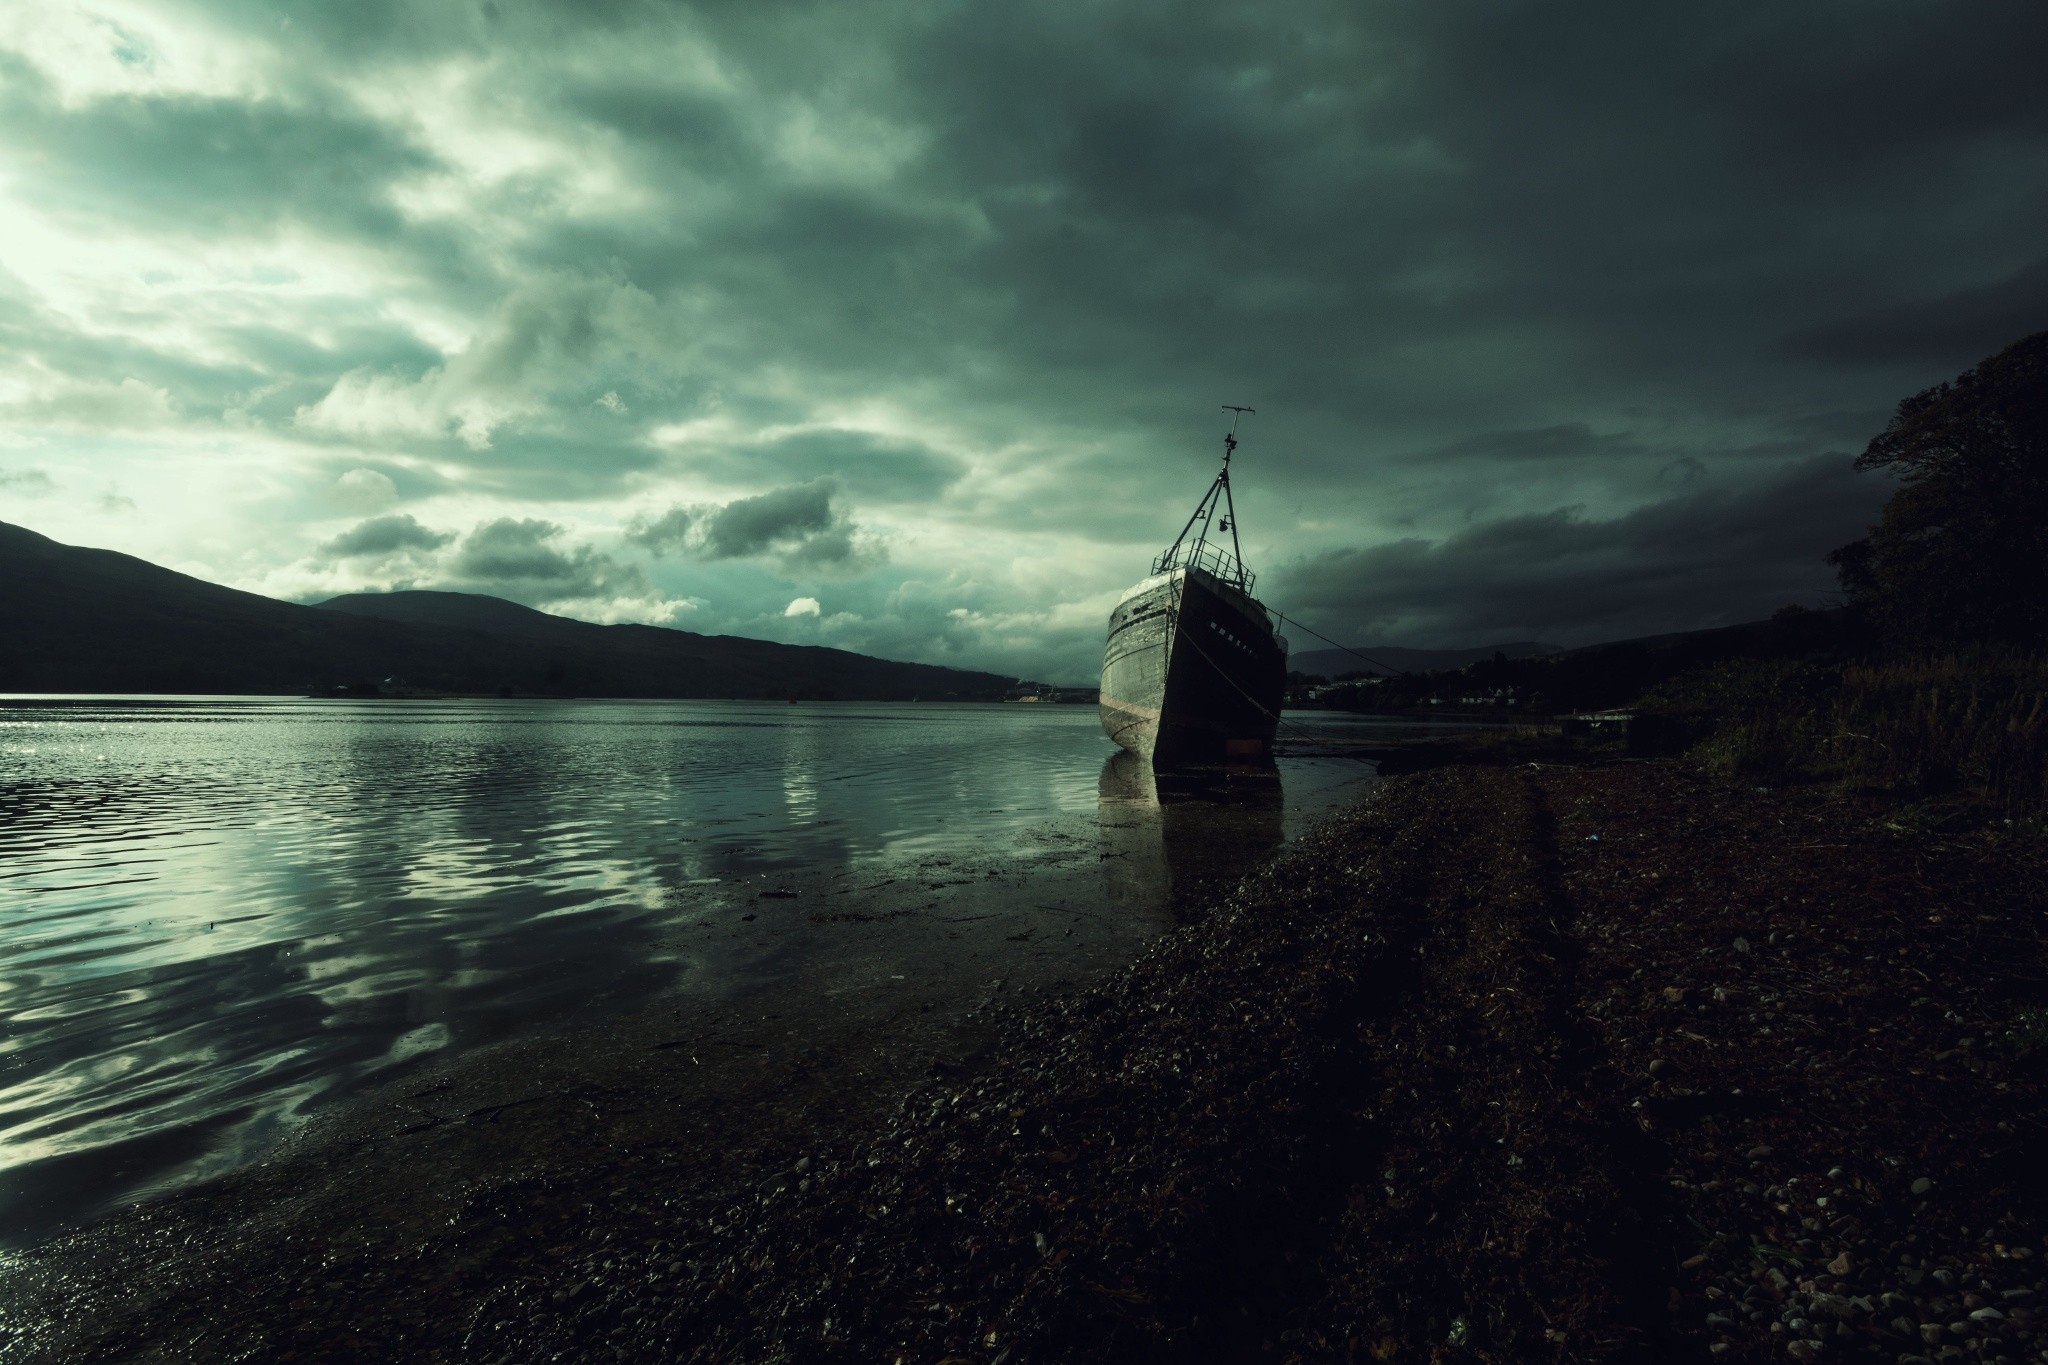 photography, Landscape, Nature, Ship, Wreck, Mountains, Water, River, Storm Wallpaper